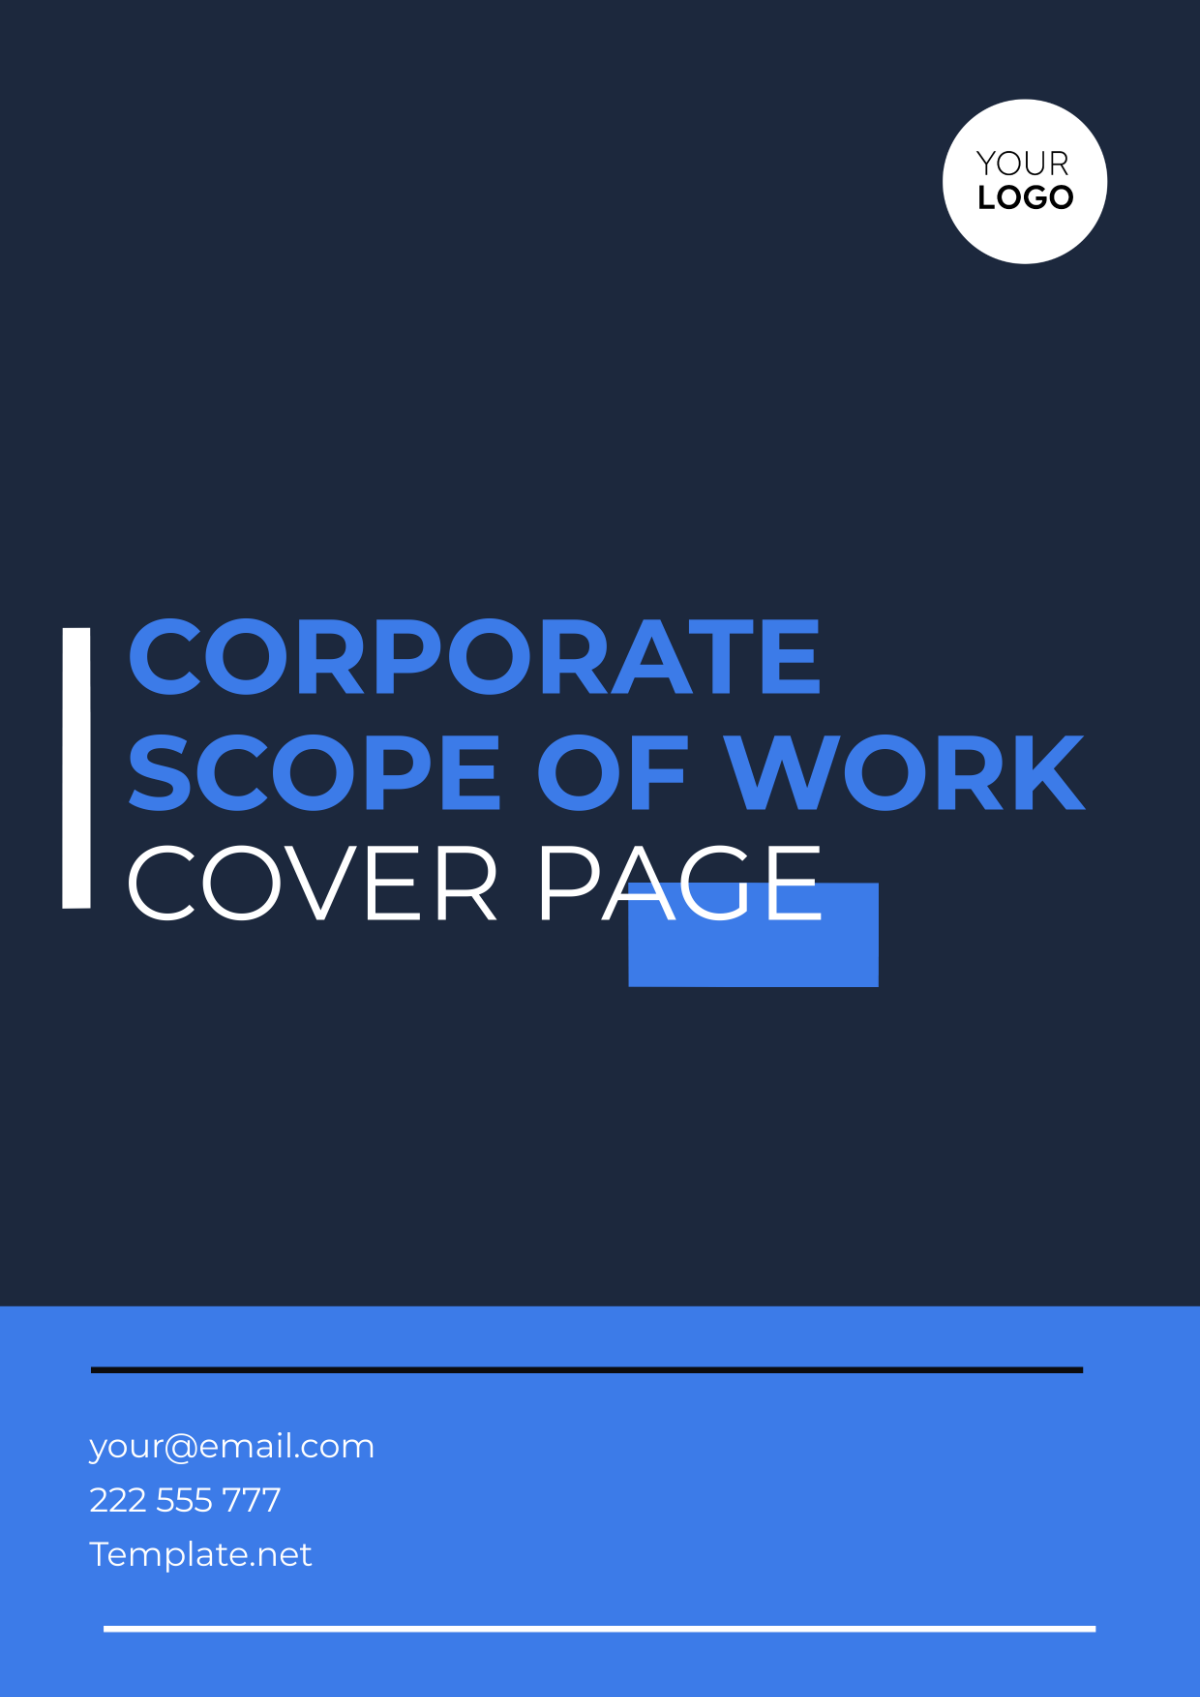 Corporate Scope of Work Cover Page Template